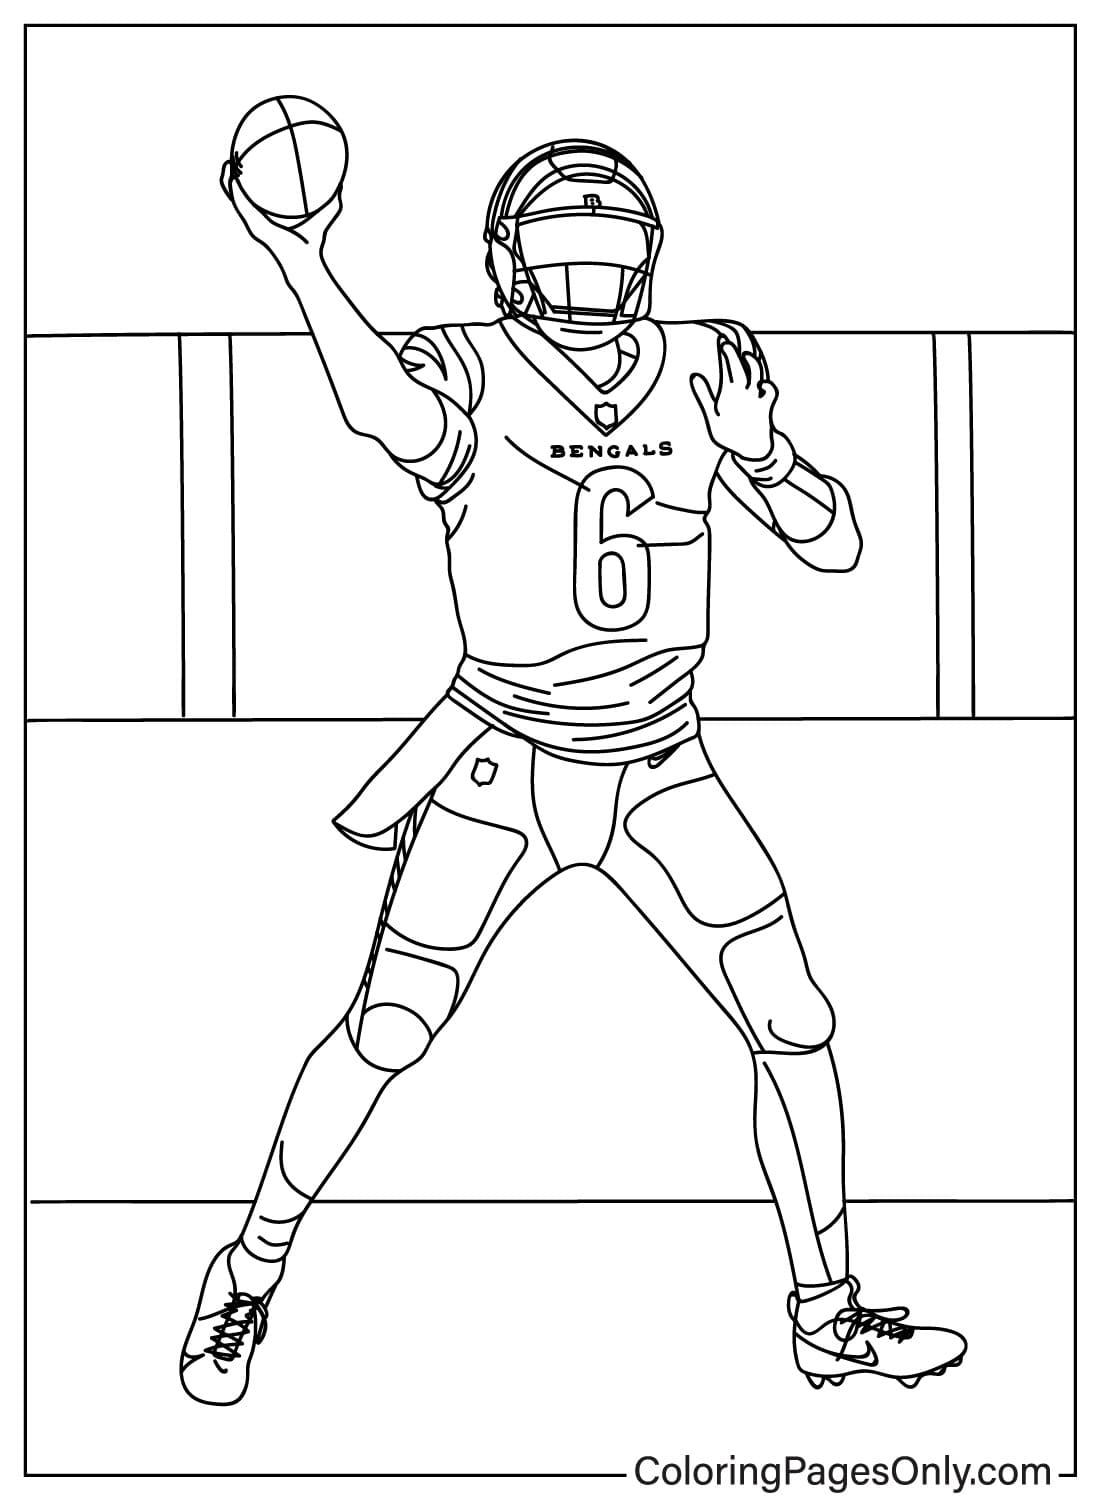 Jake Browning Coloring Page from Cincinnati Bengals